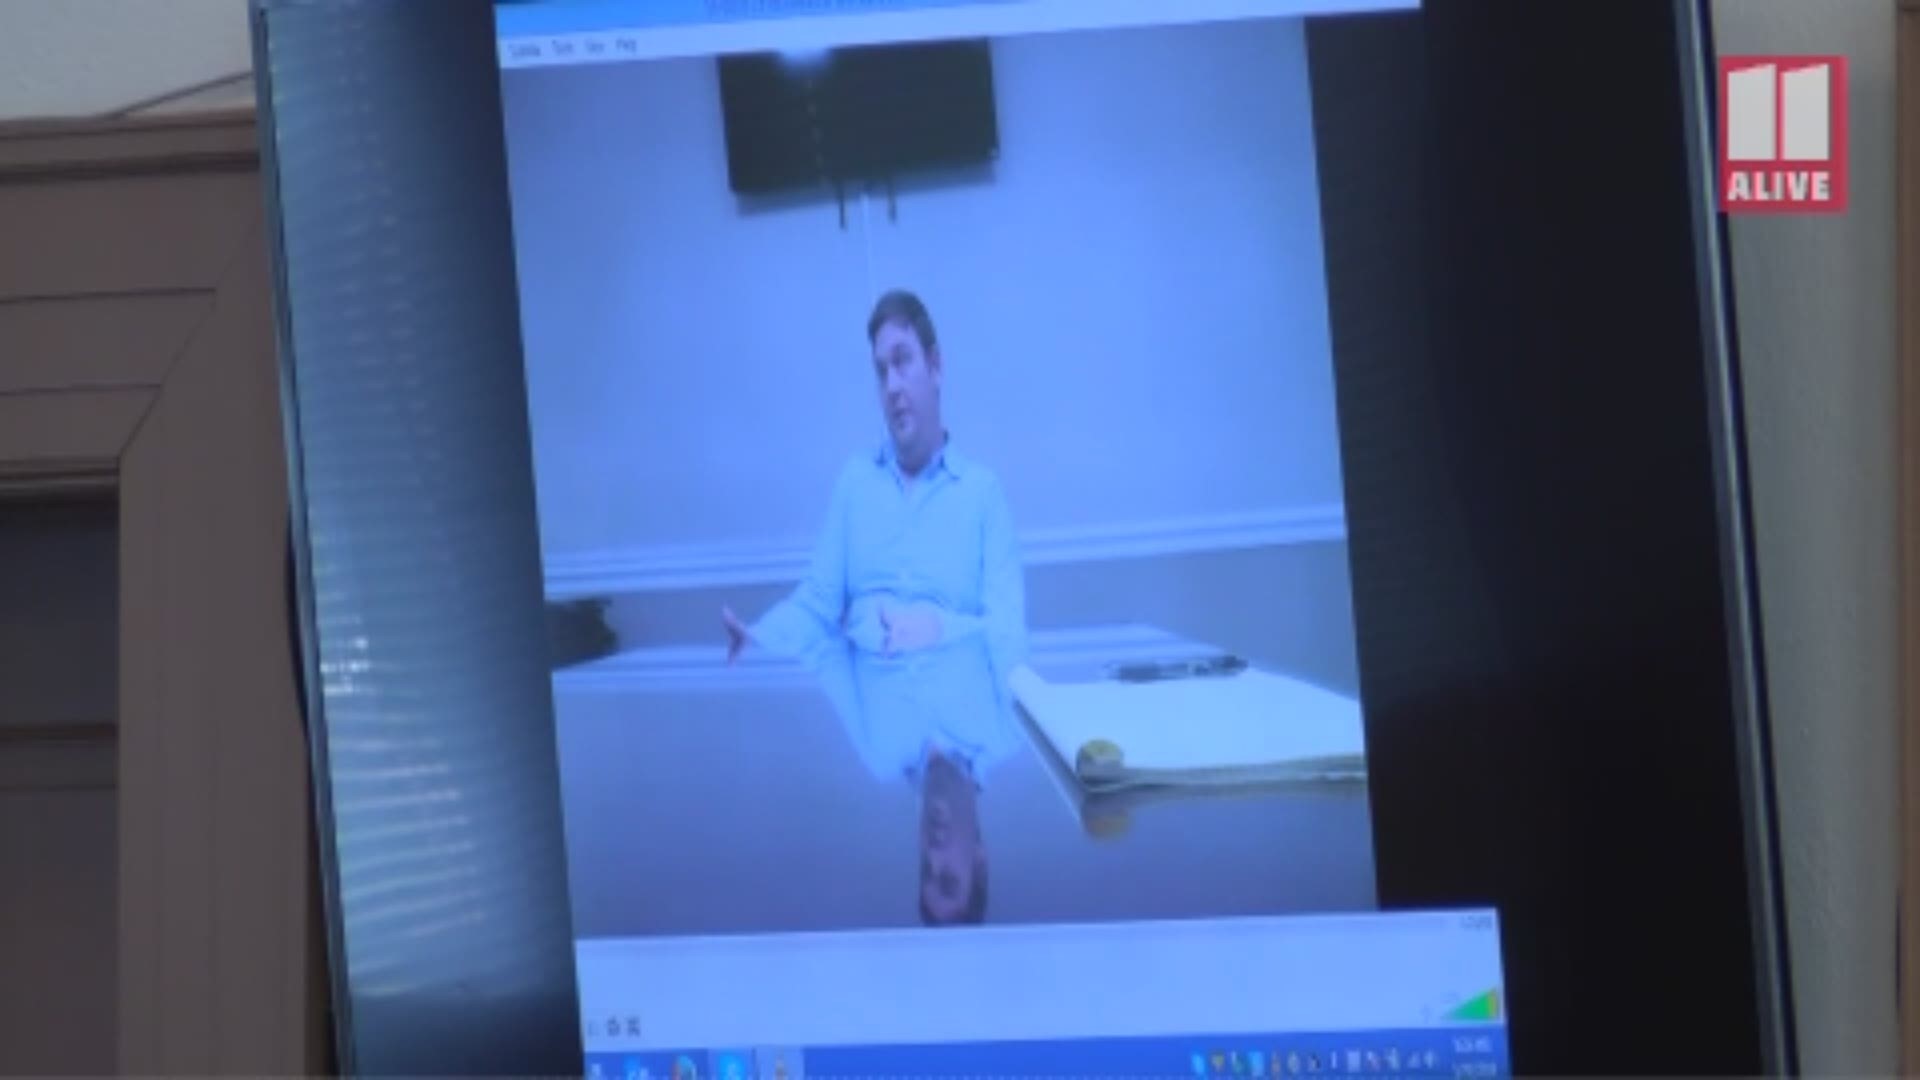 In a video statement to the GBI, Bo Dukes said he and Ryan Duke burned Tara Grinstead's body over a two day period.